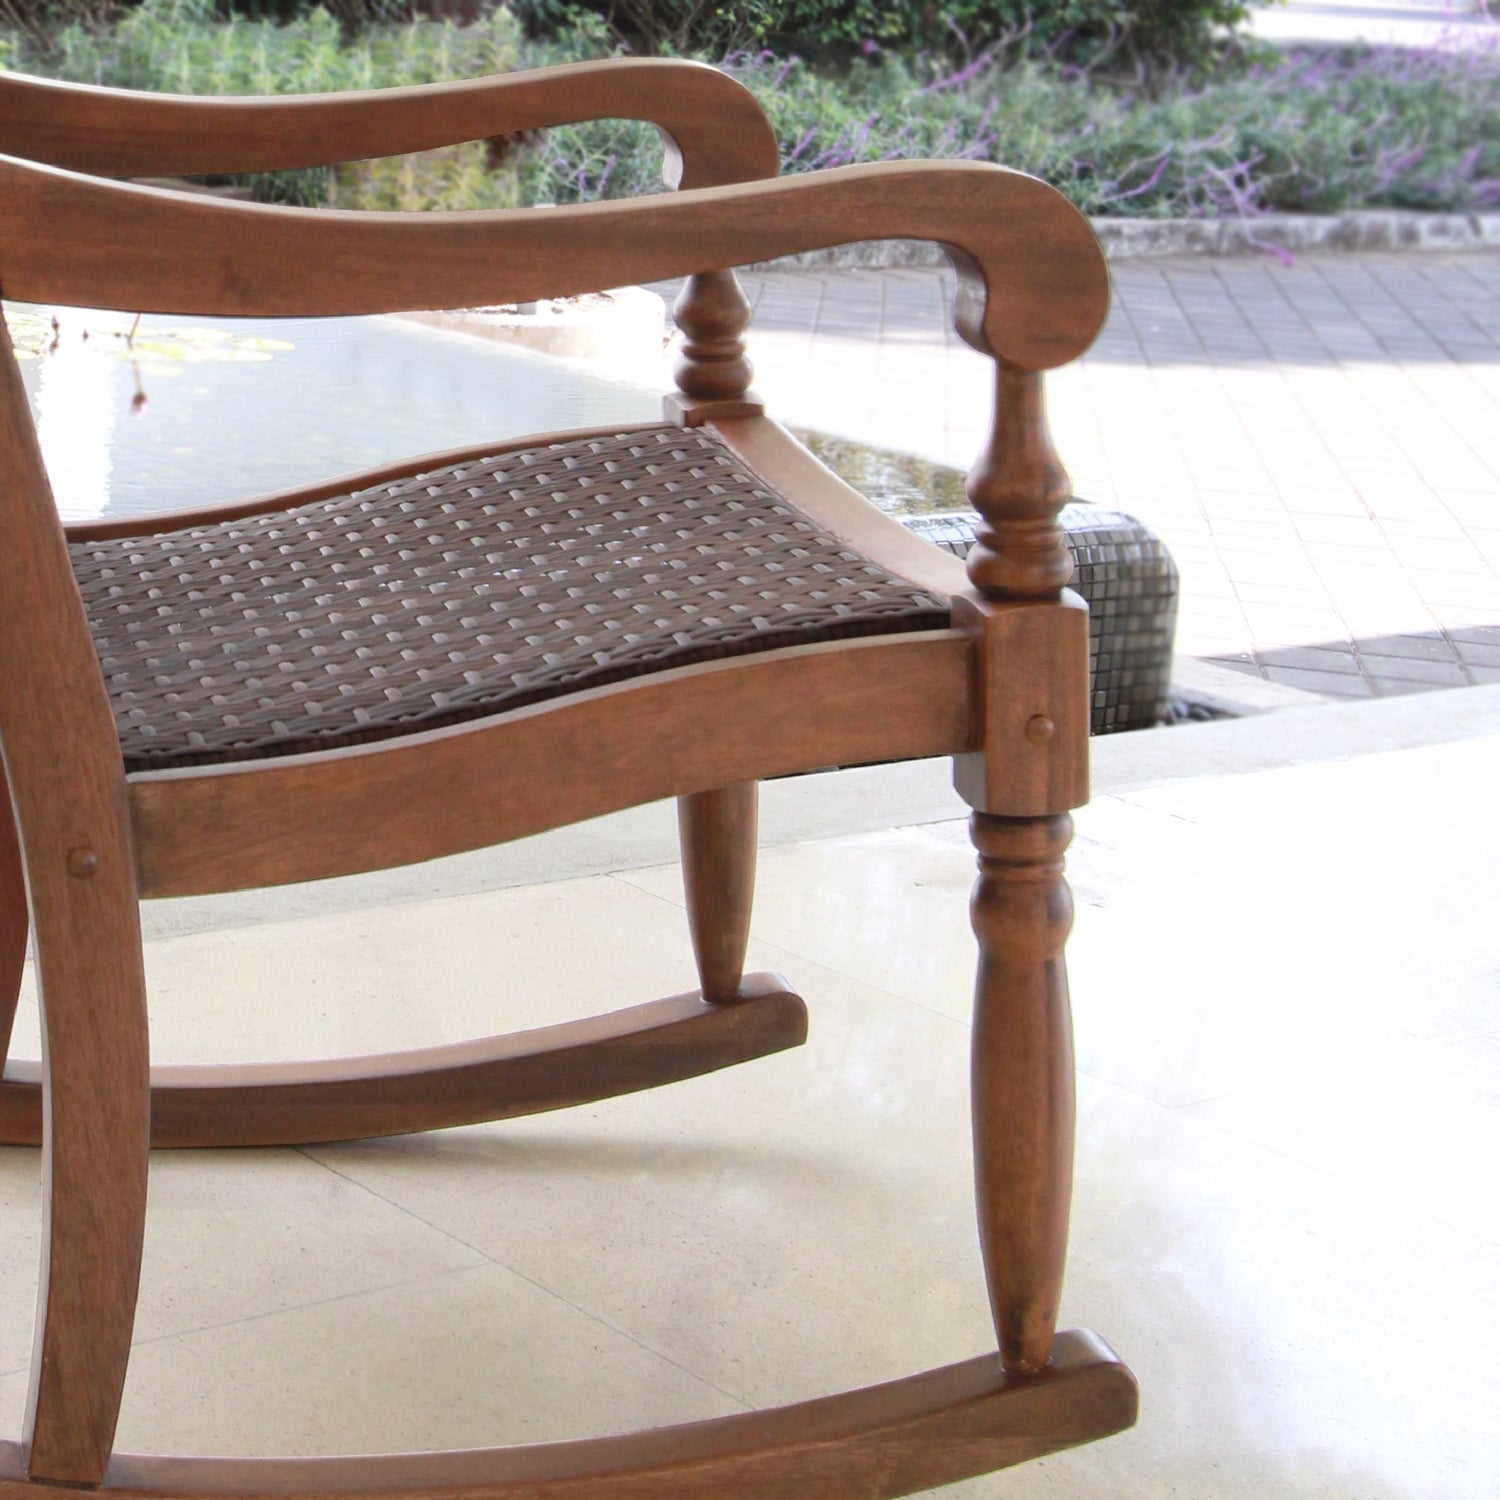 Bonn Mahogany Wood Brown Wicker Oversized Porch Rocking Chair - Cambridge Casual